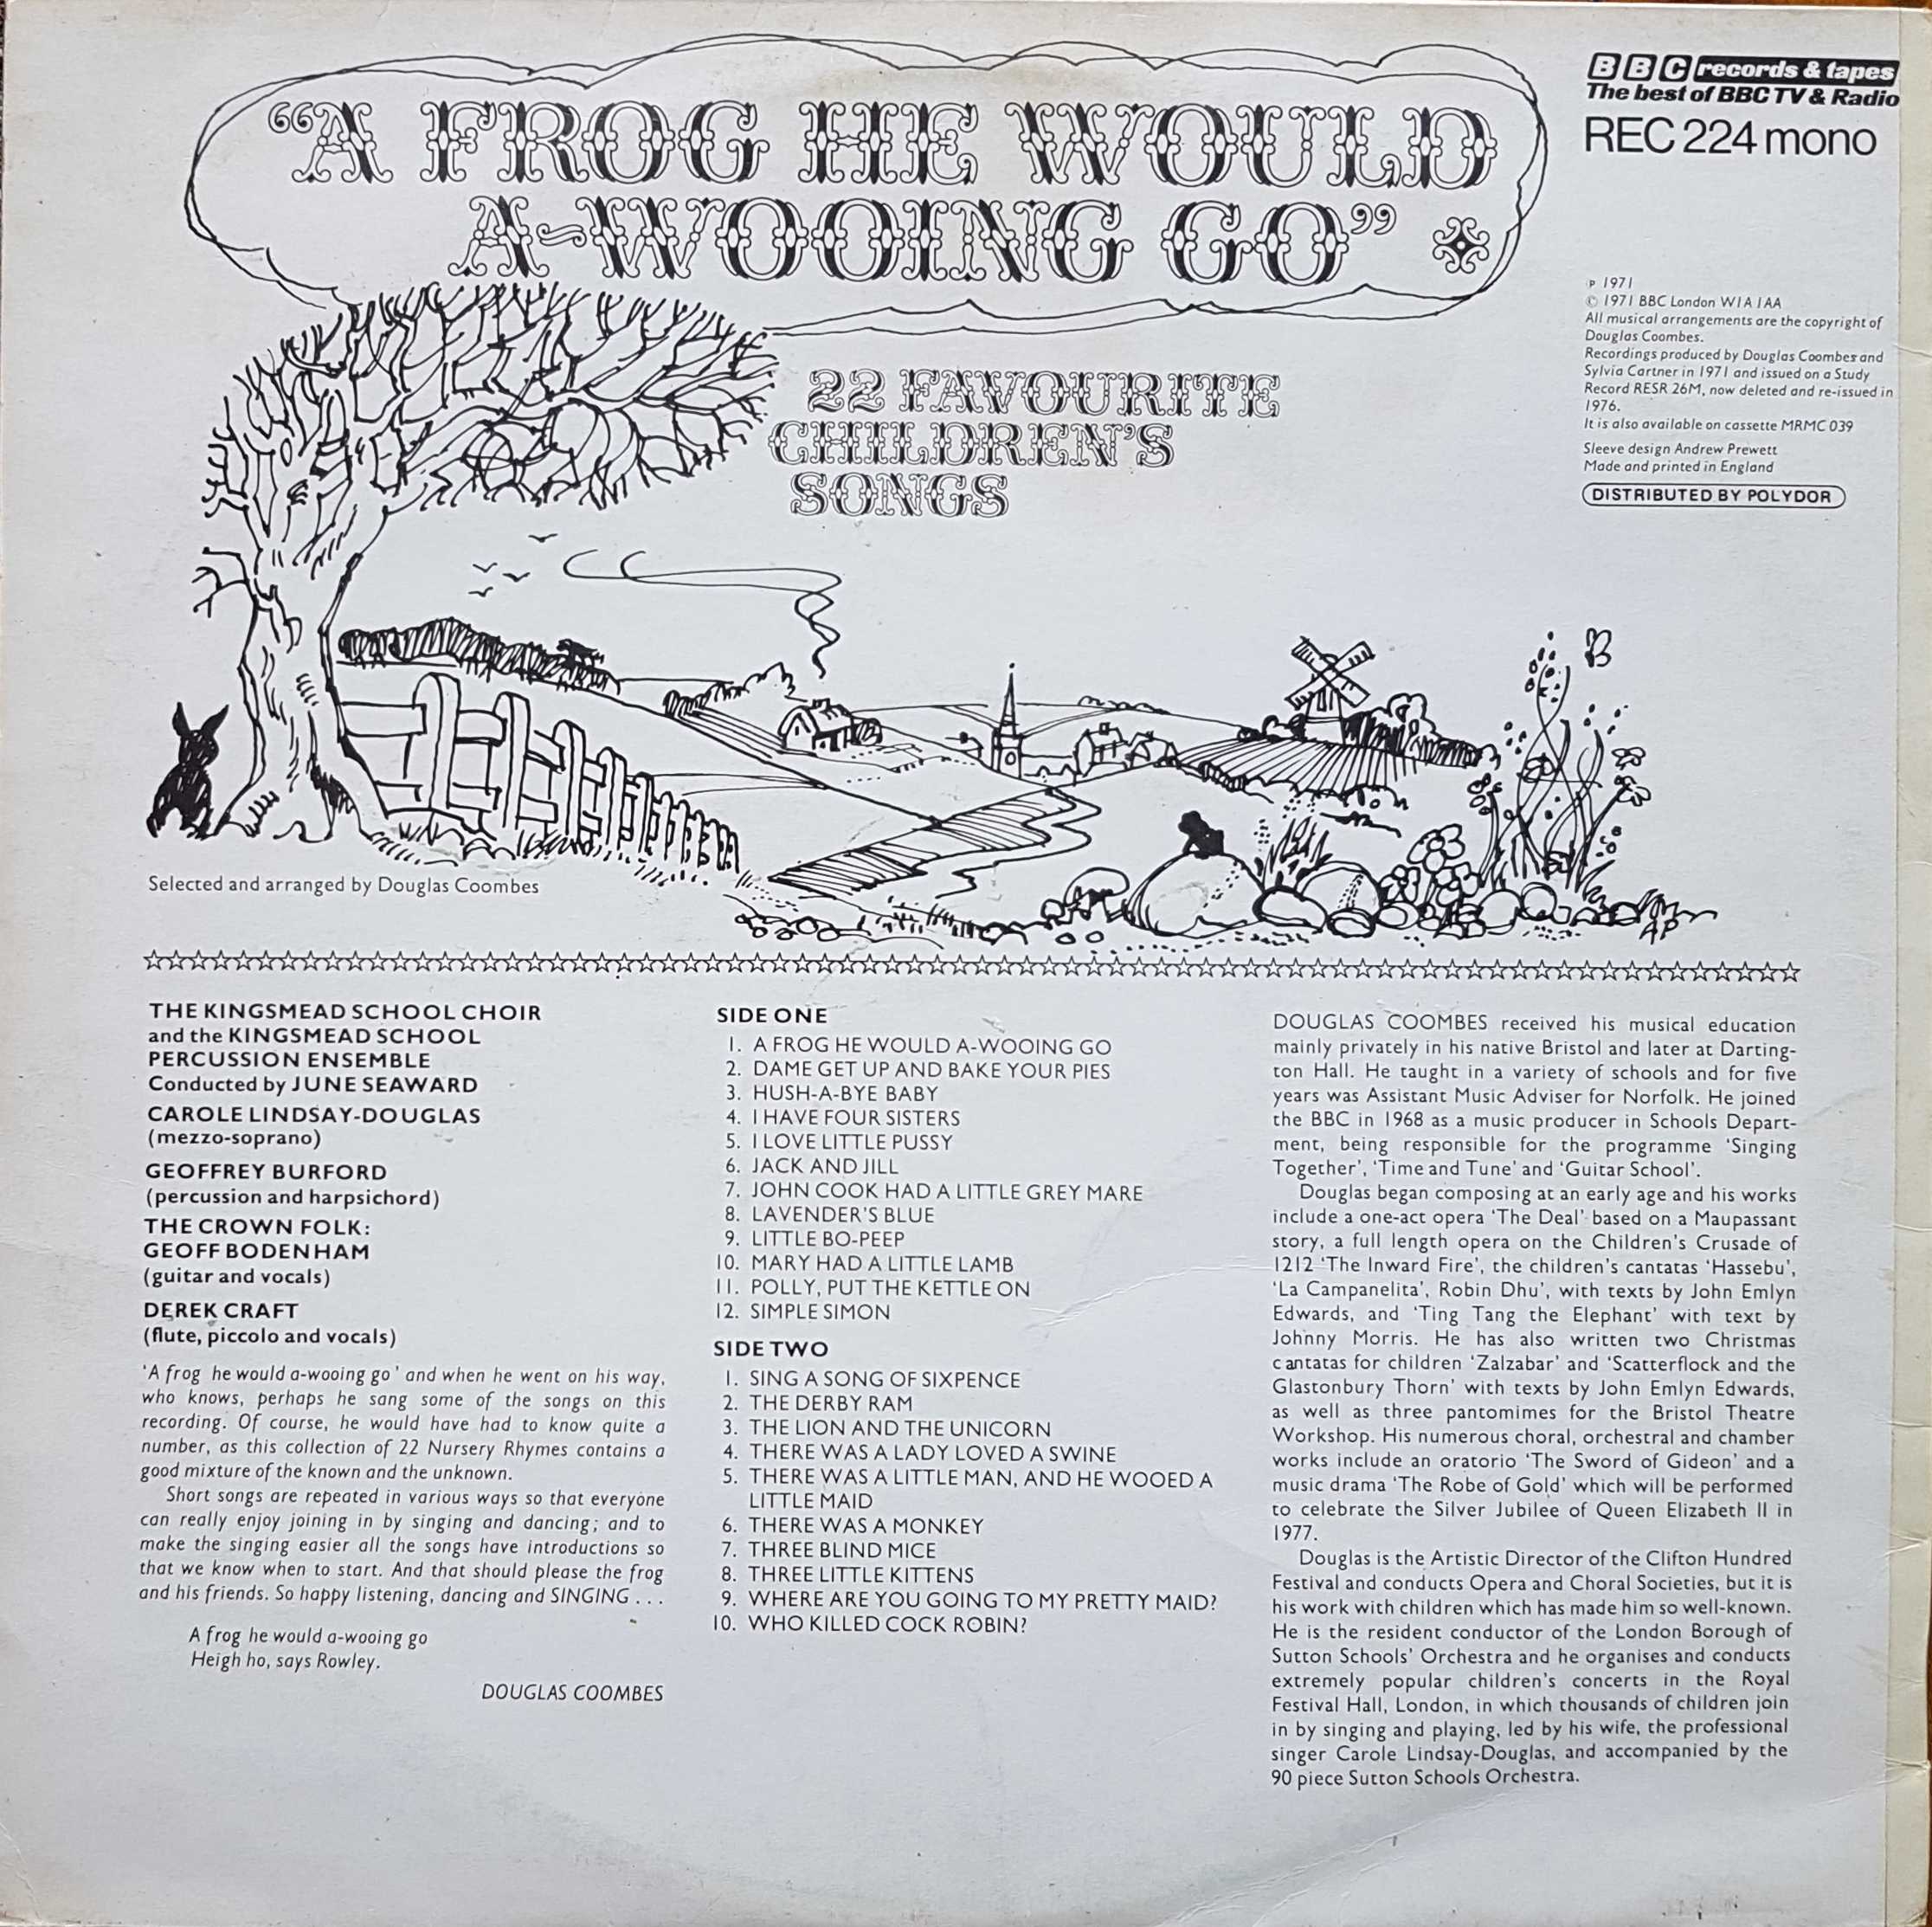 Picture of REC 224 A frog he would a wooing go and other stories by artist Various from the BBC records and Tapes library